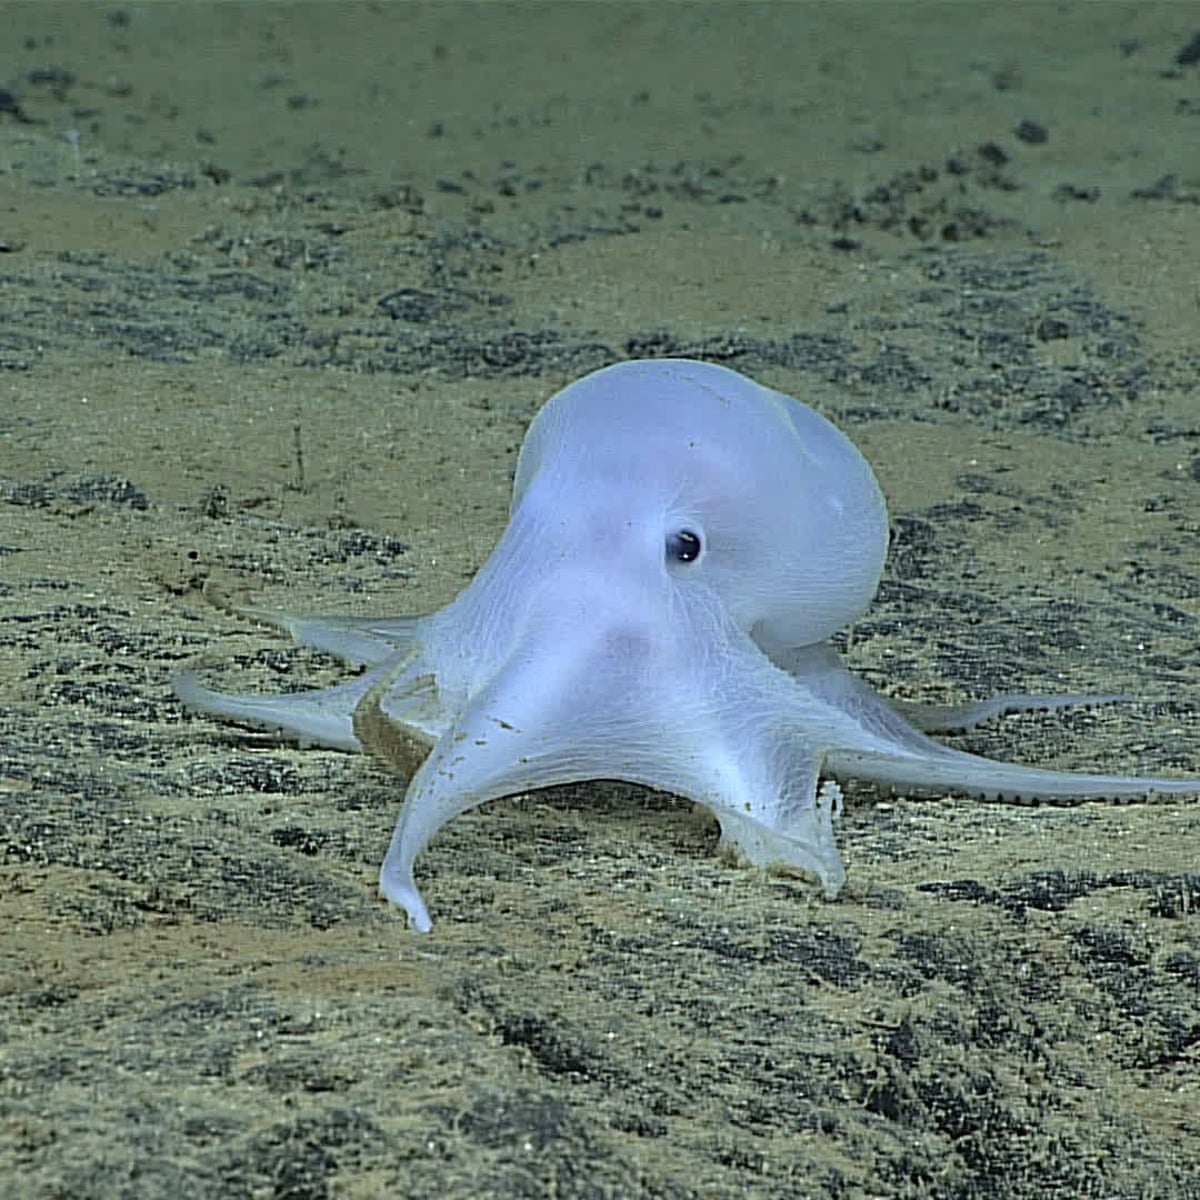 Discovered in the deep: meet Casper the ghostly octopus ...